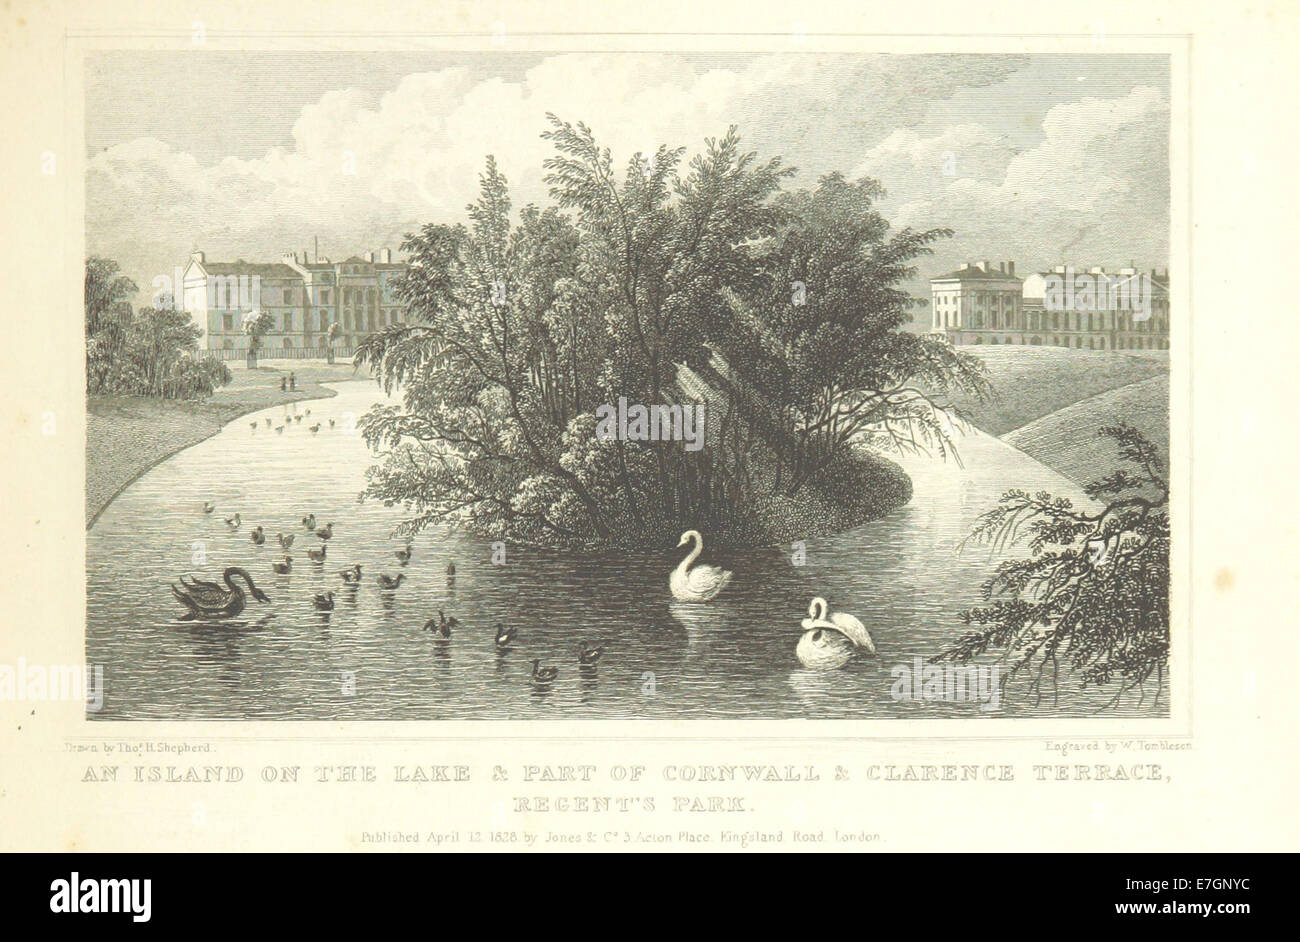 An Island on the Lake, and Part of Cornwall and Clarence Terrace, Regent's Park - Shepherd, Metropolitan Improvements (1828), p205 Stock Photo